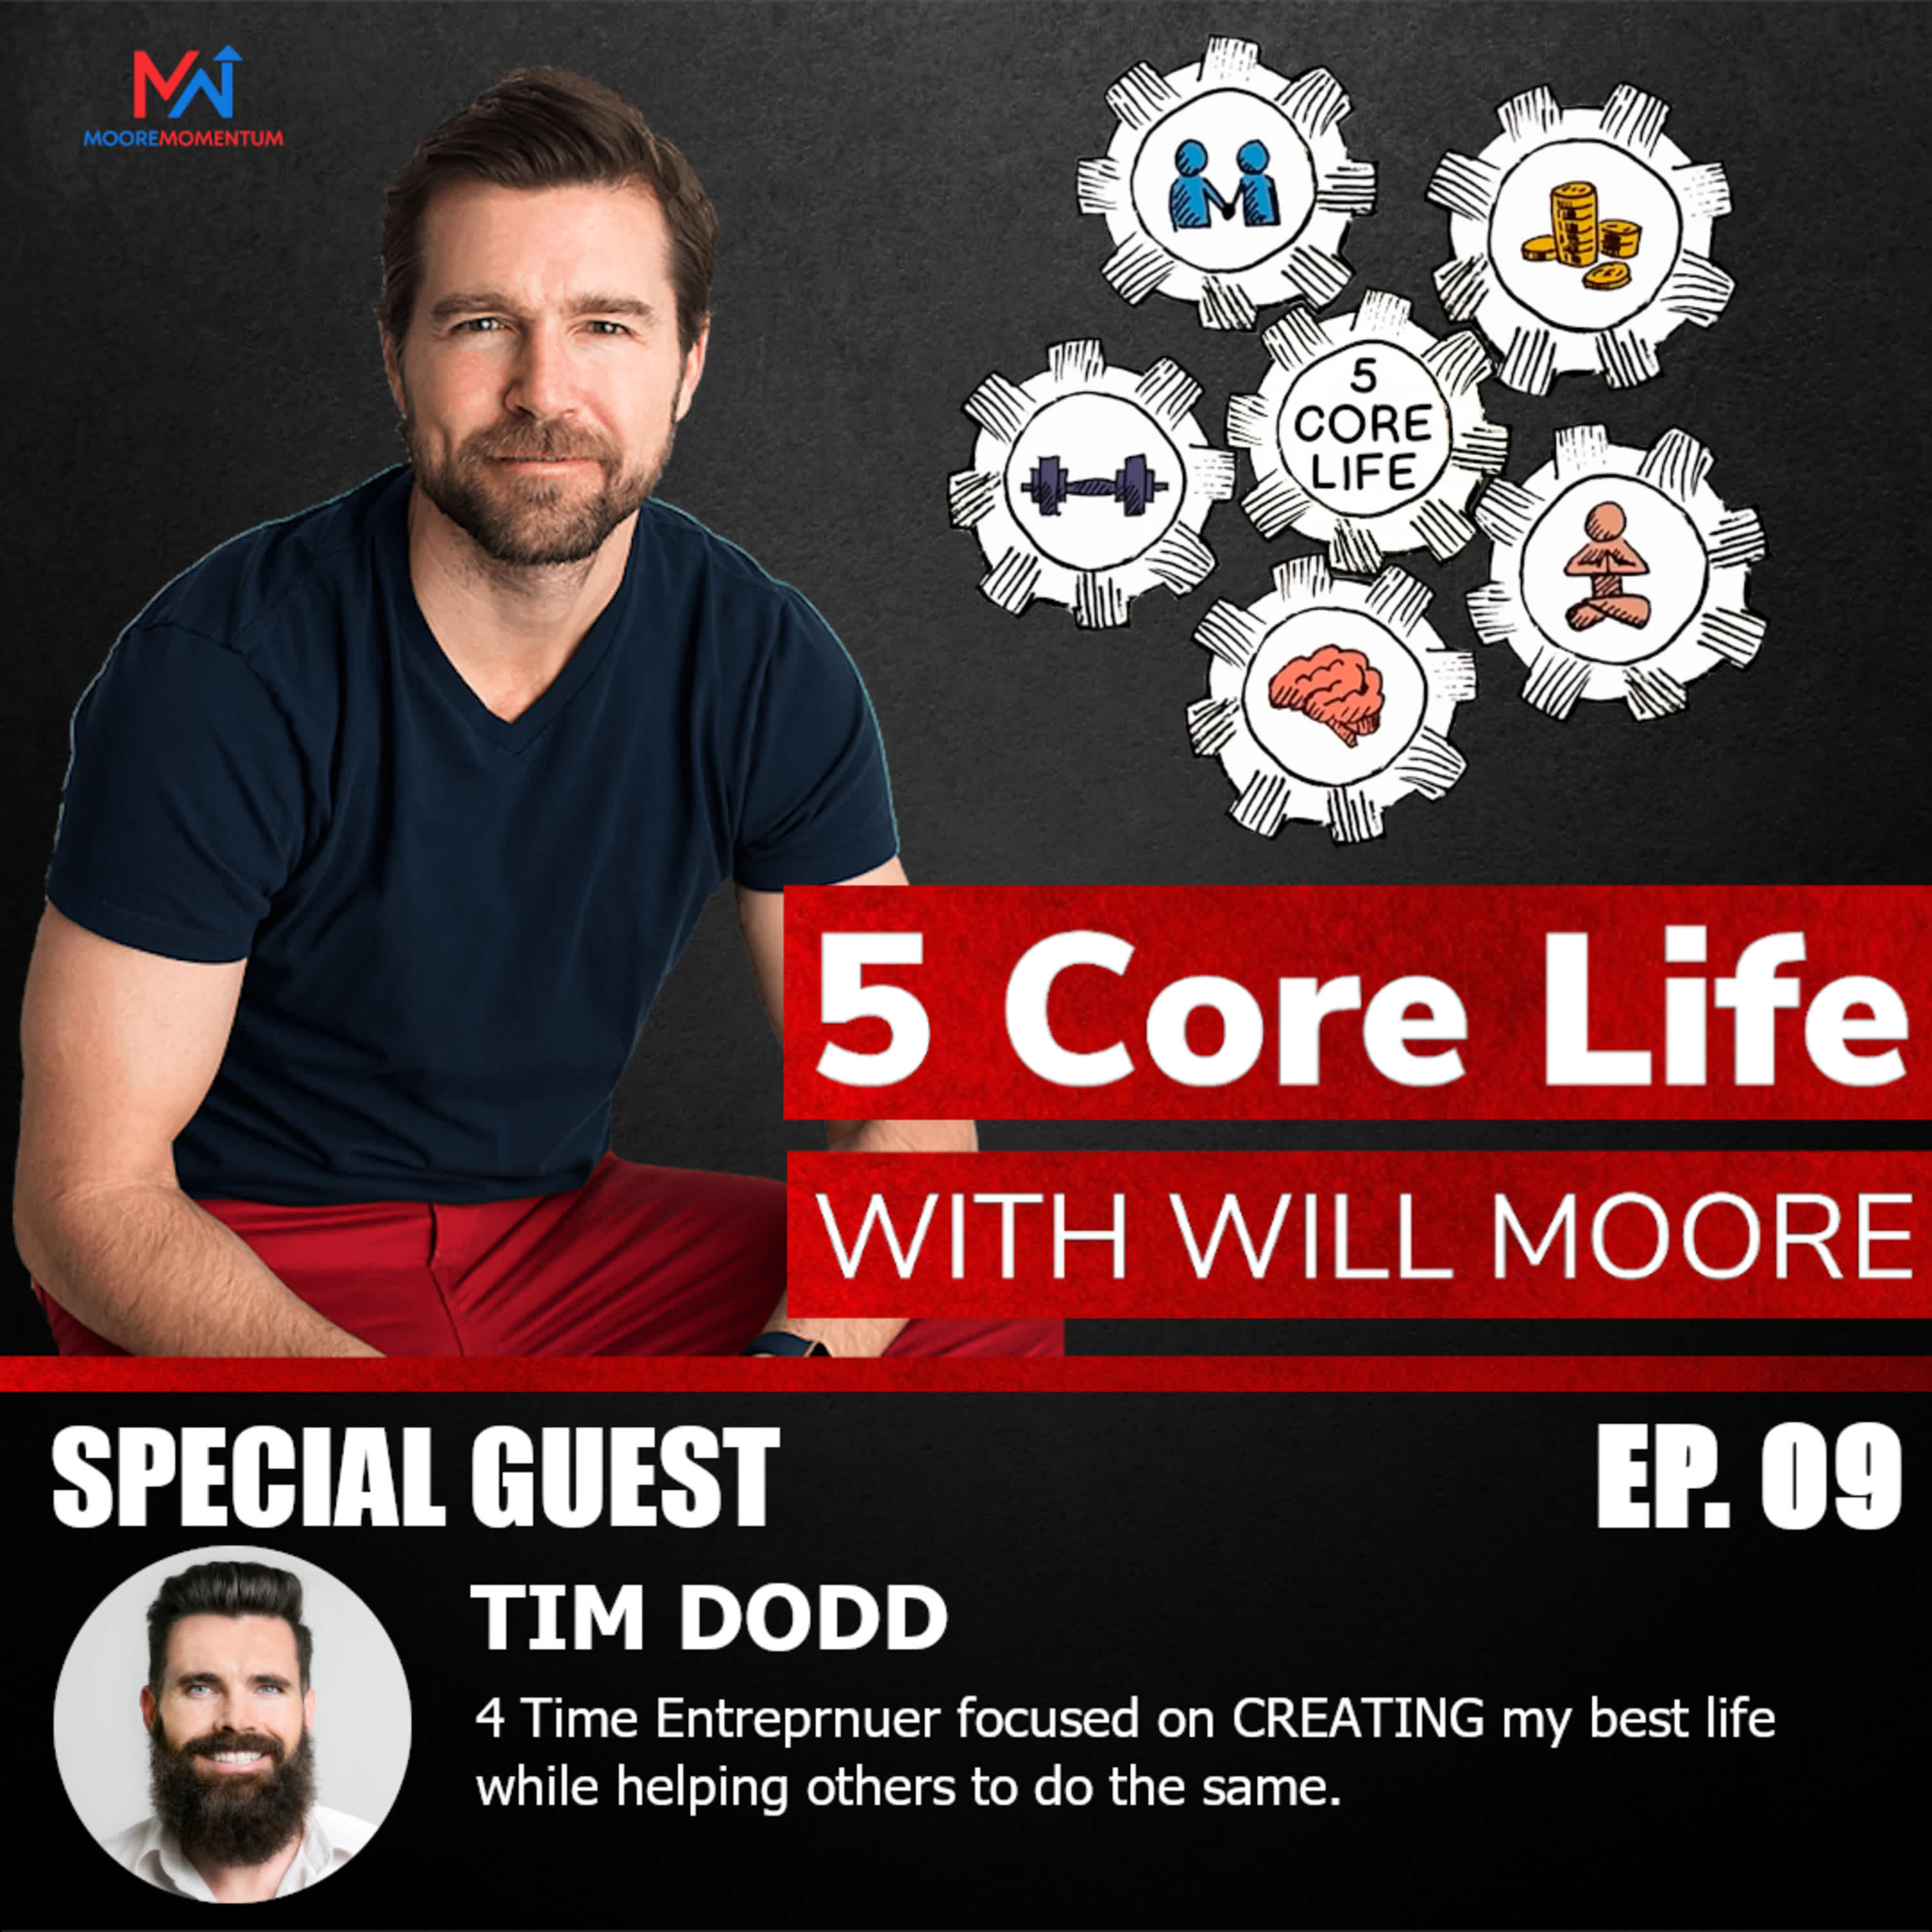 Entrepreneurs: Do You Have The Right Mindset To Gain Momentum In Your Business? Sit Down With Will & Special Guest Tim Dodd To Learn The Entrepreneur Mindset

